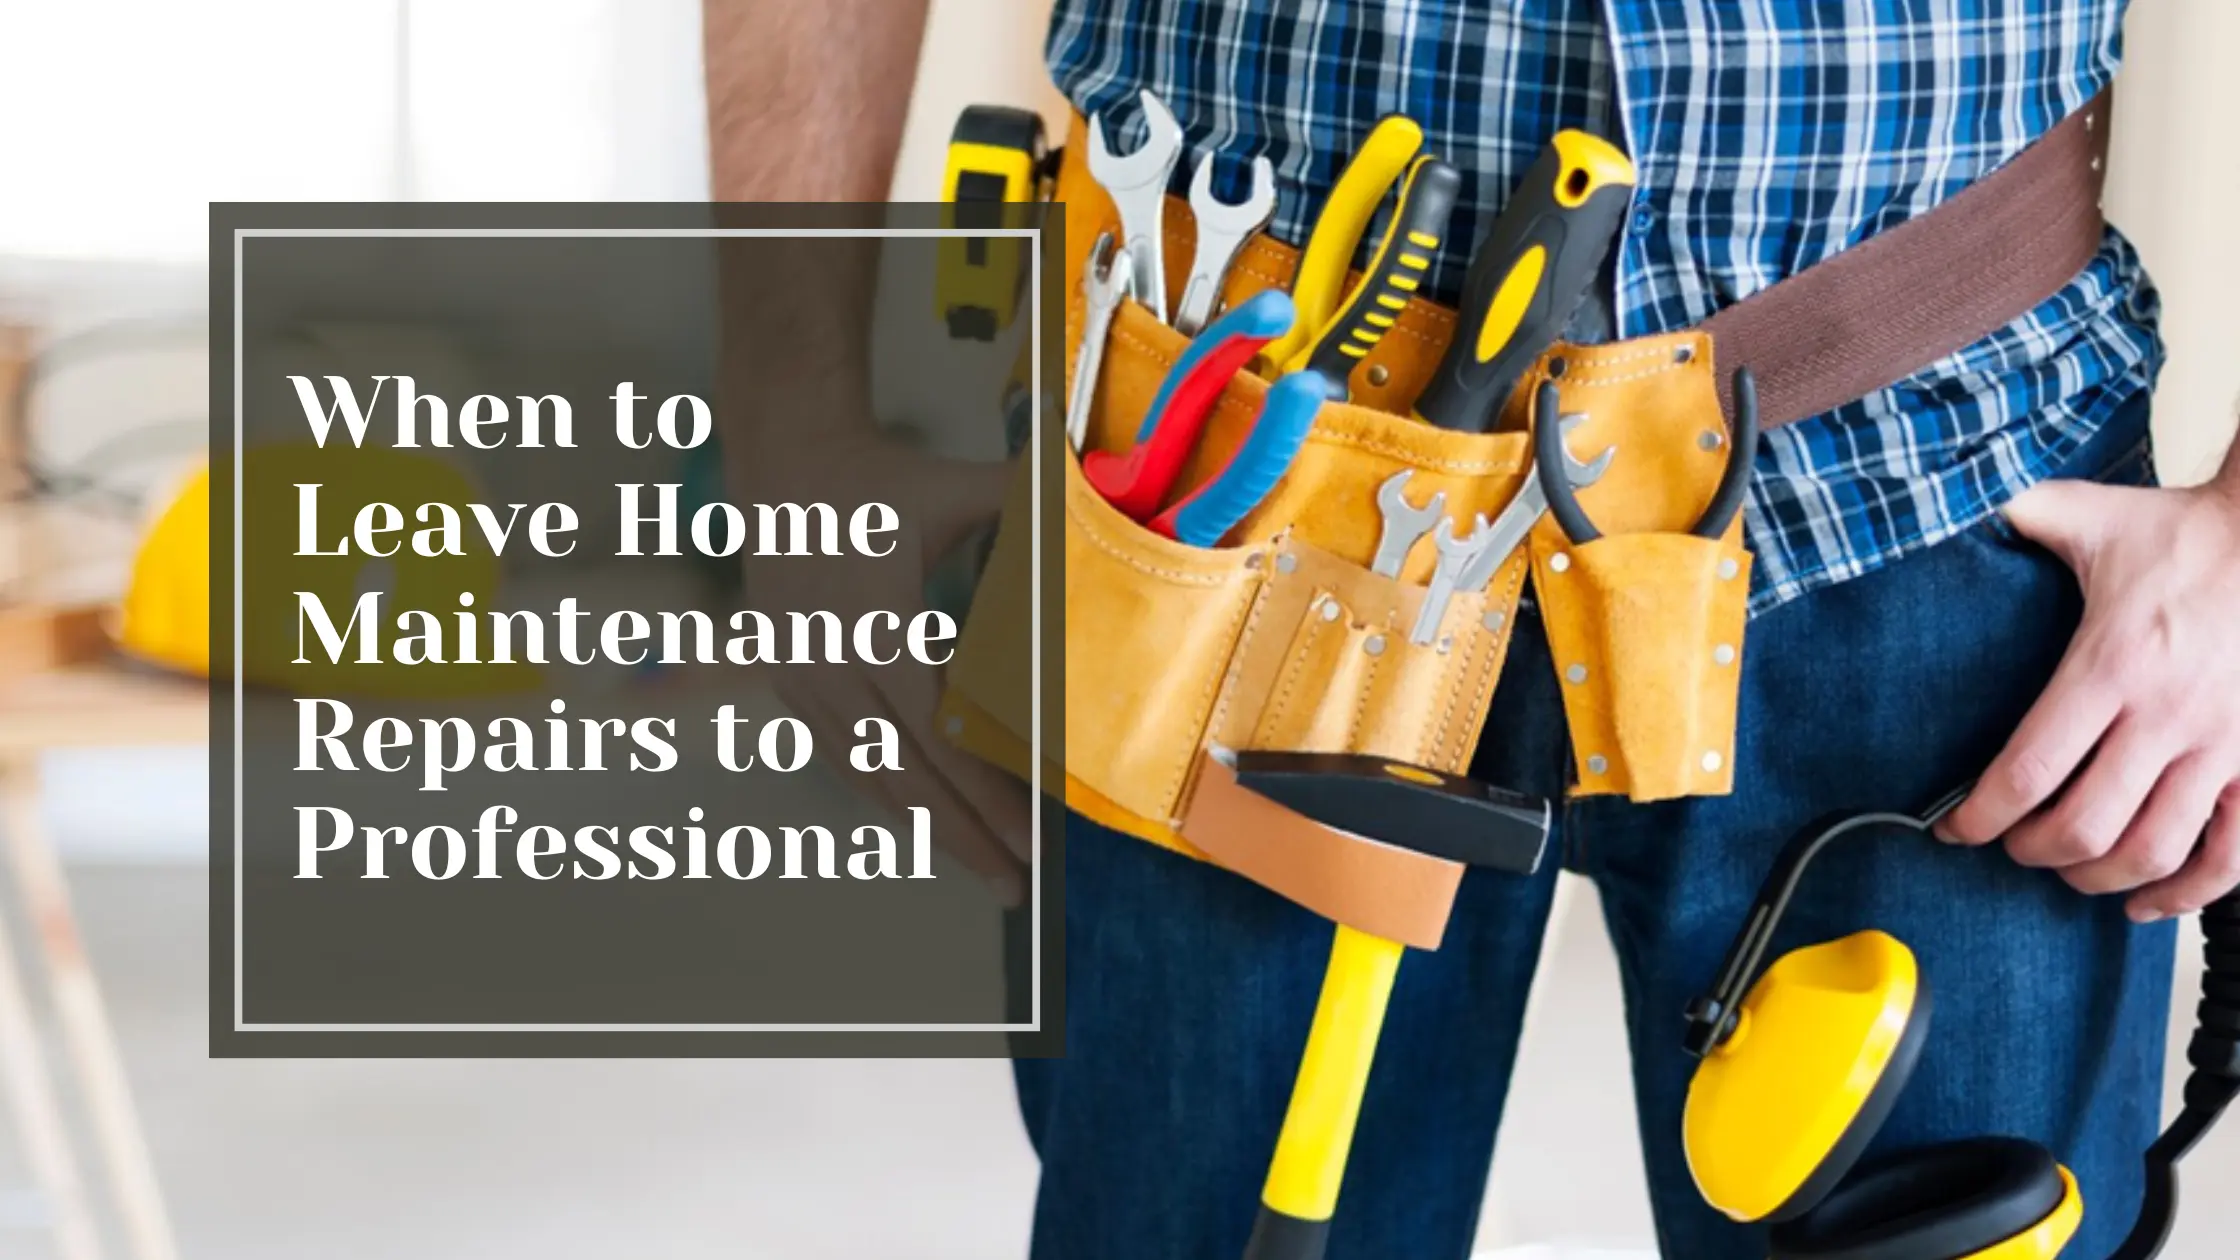 When to Leave Home Maintenance Repairs to a Professional